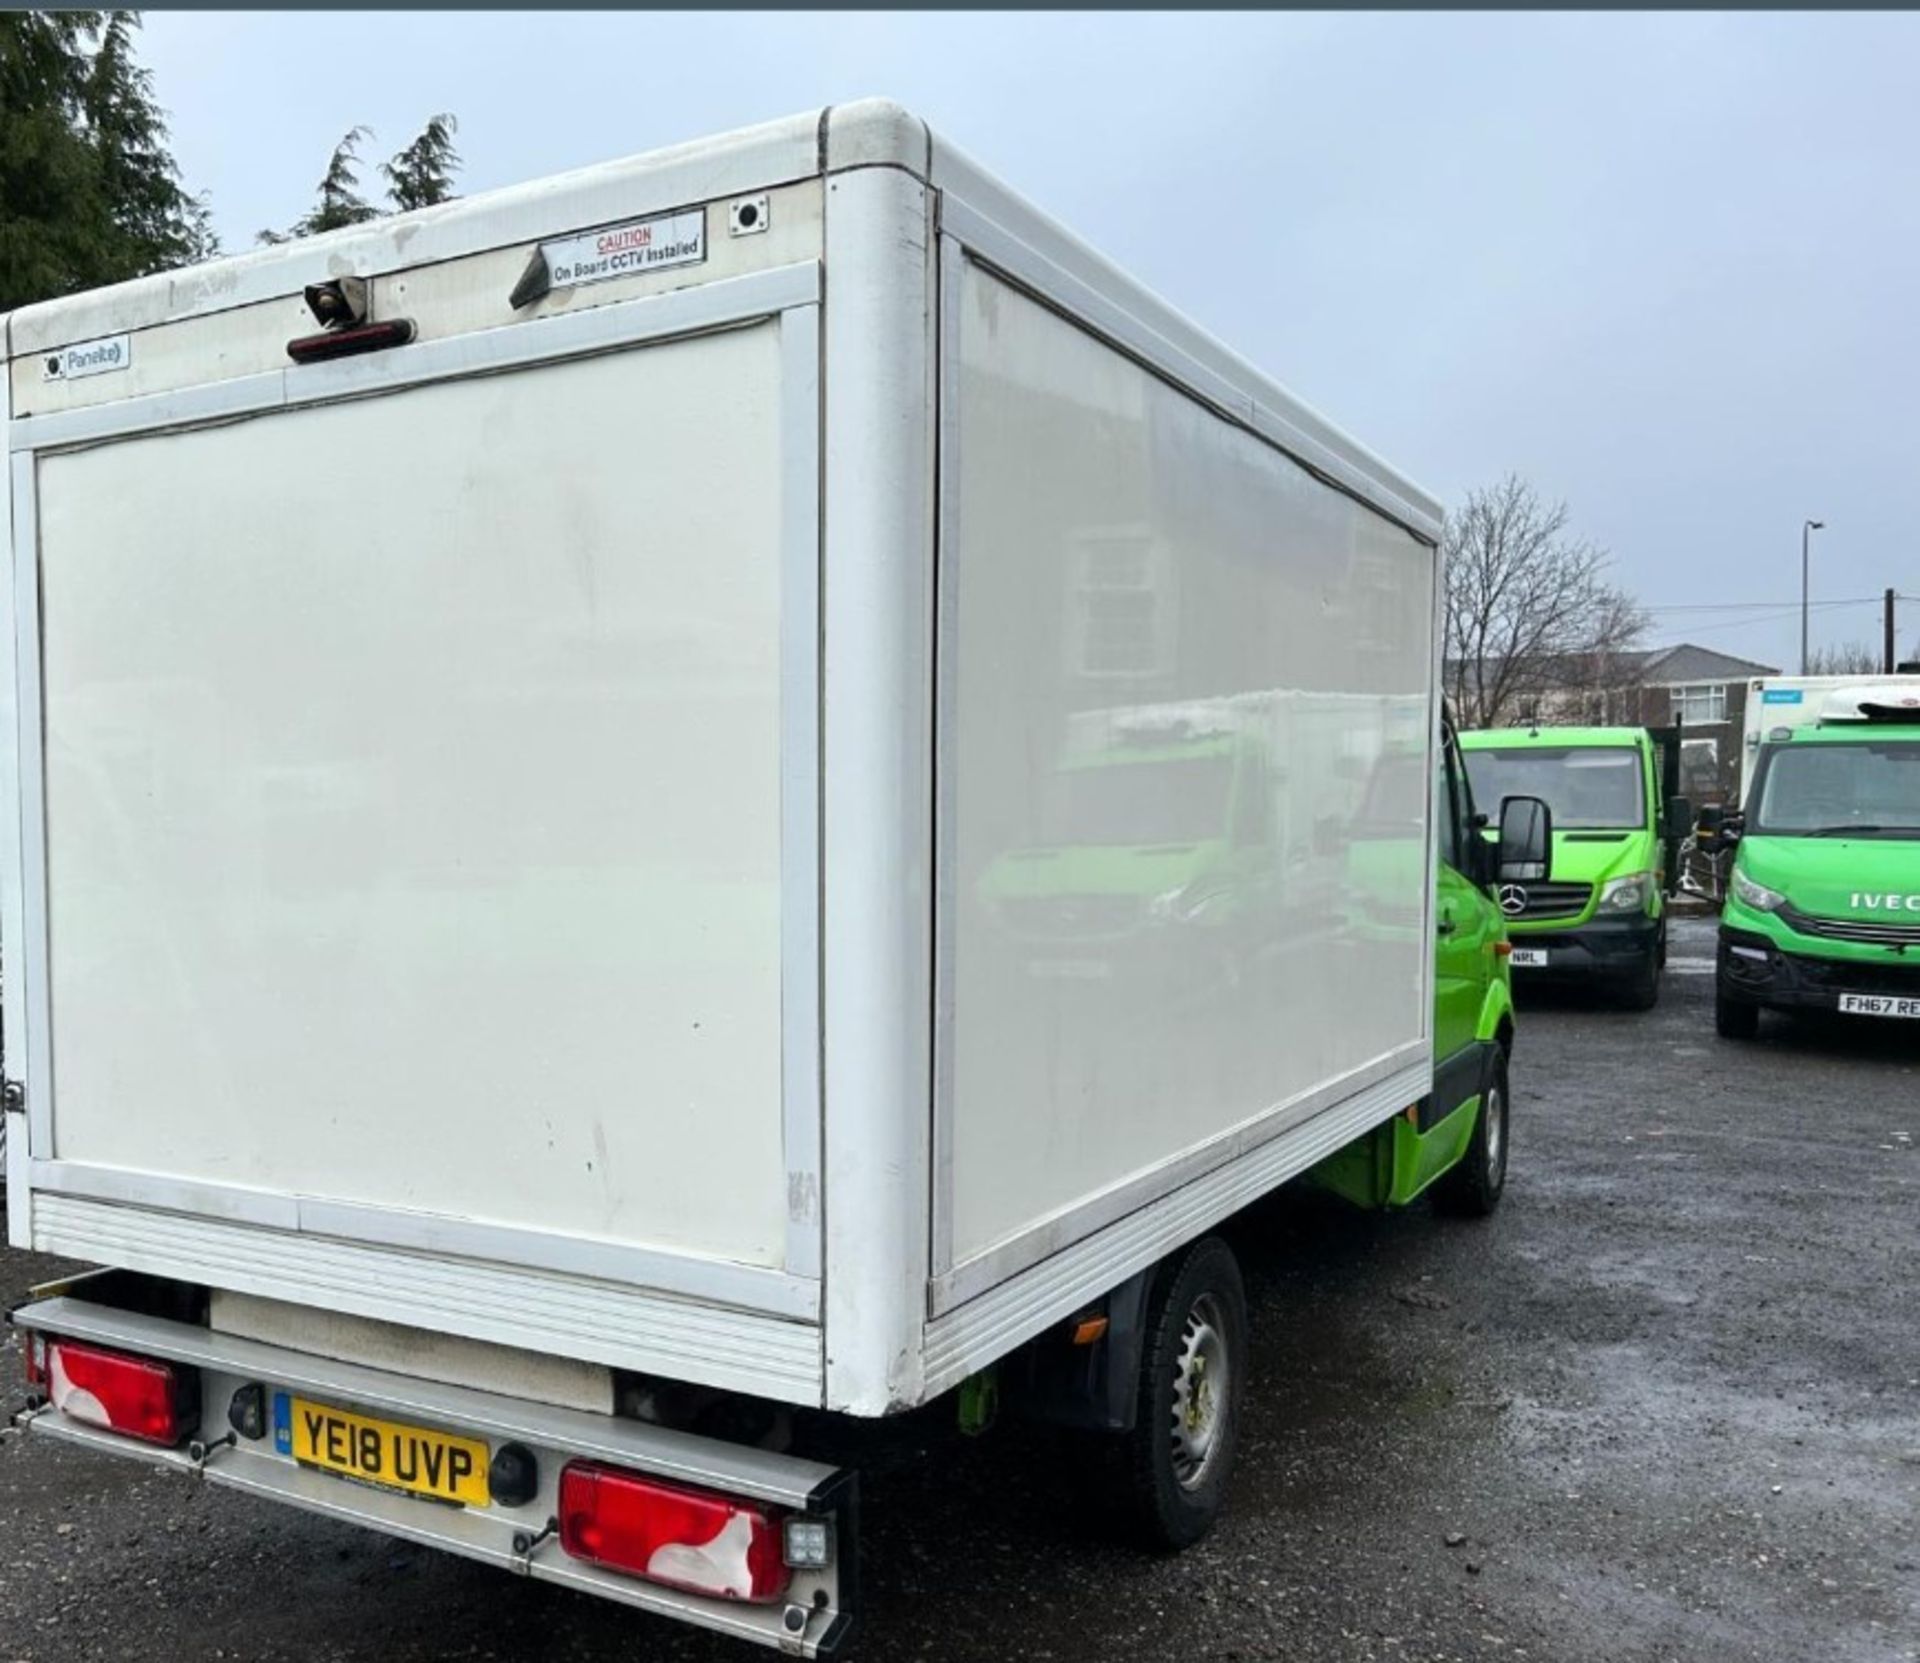 2018 MERCEDES-BENZ SPRINTER 314 CDI FRIDGE FREEZER CHASSIS CAB READY FOR YOUR BUSINES! - Image 2 of 12